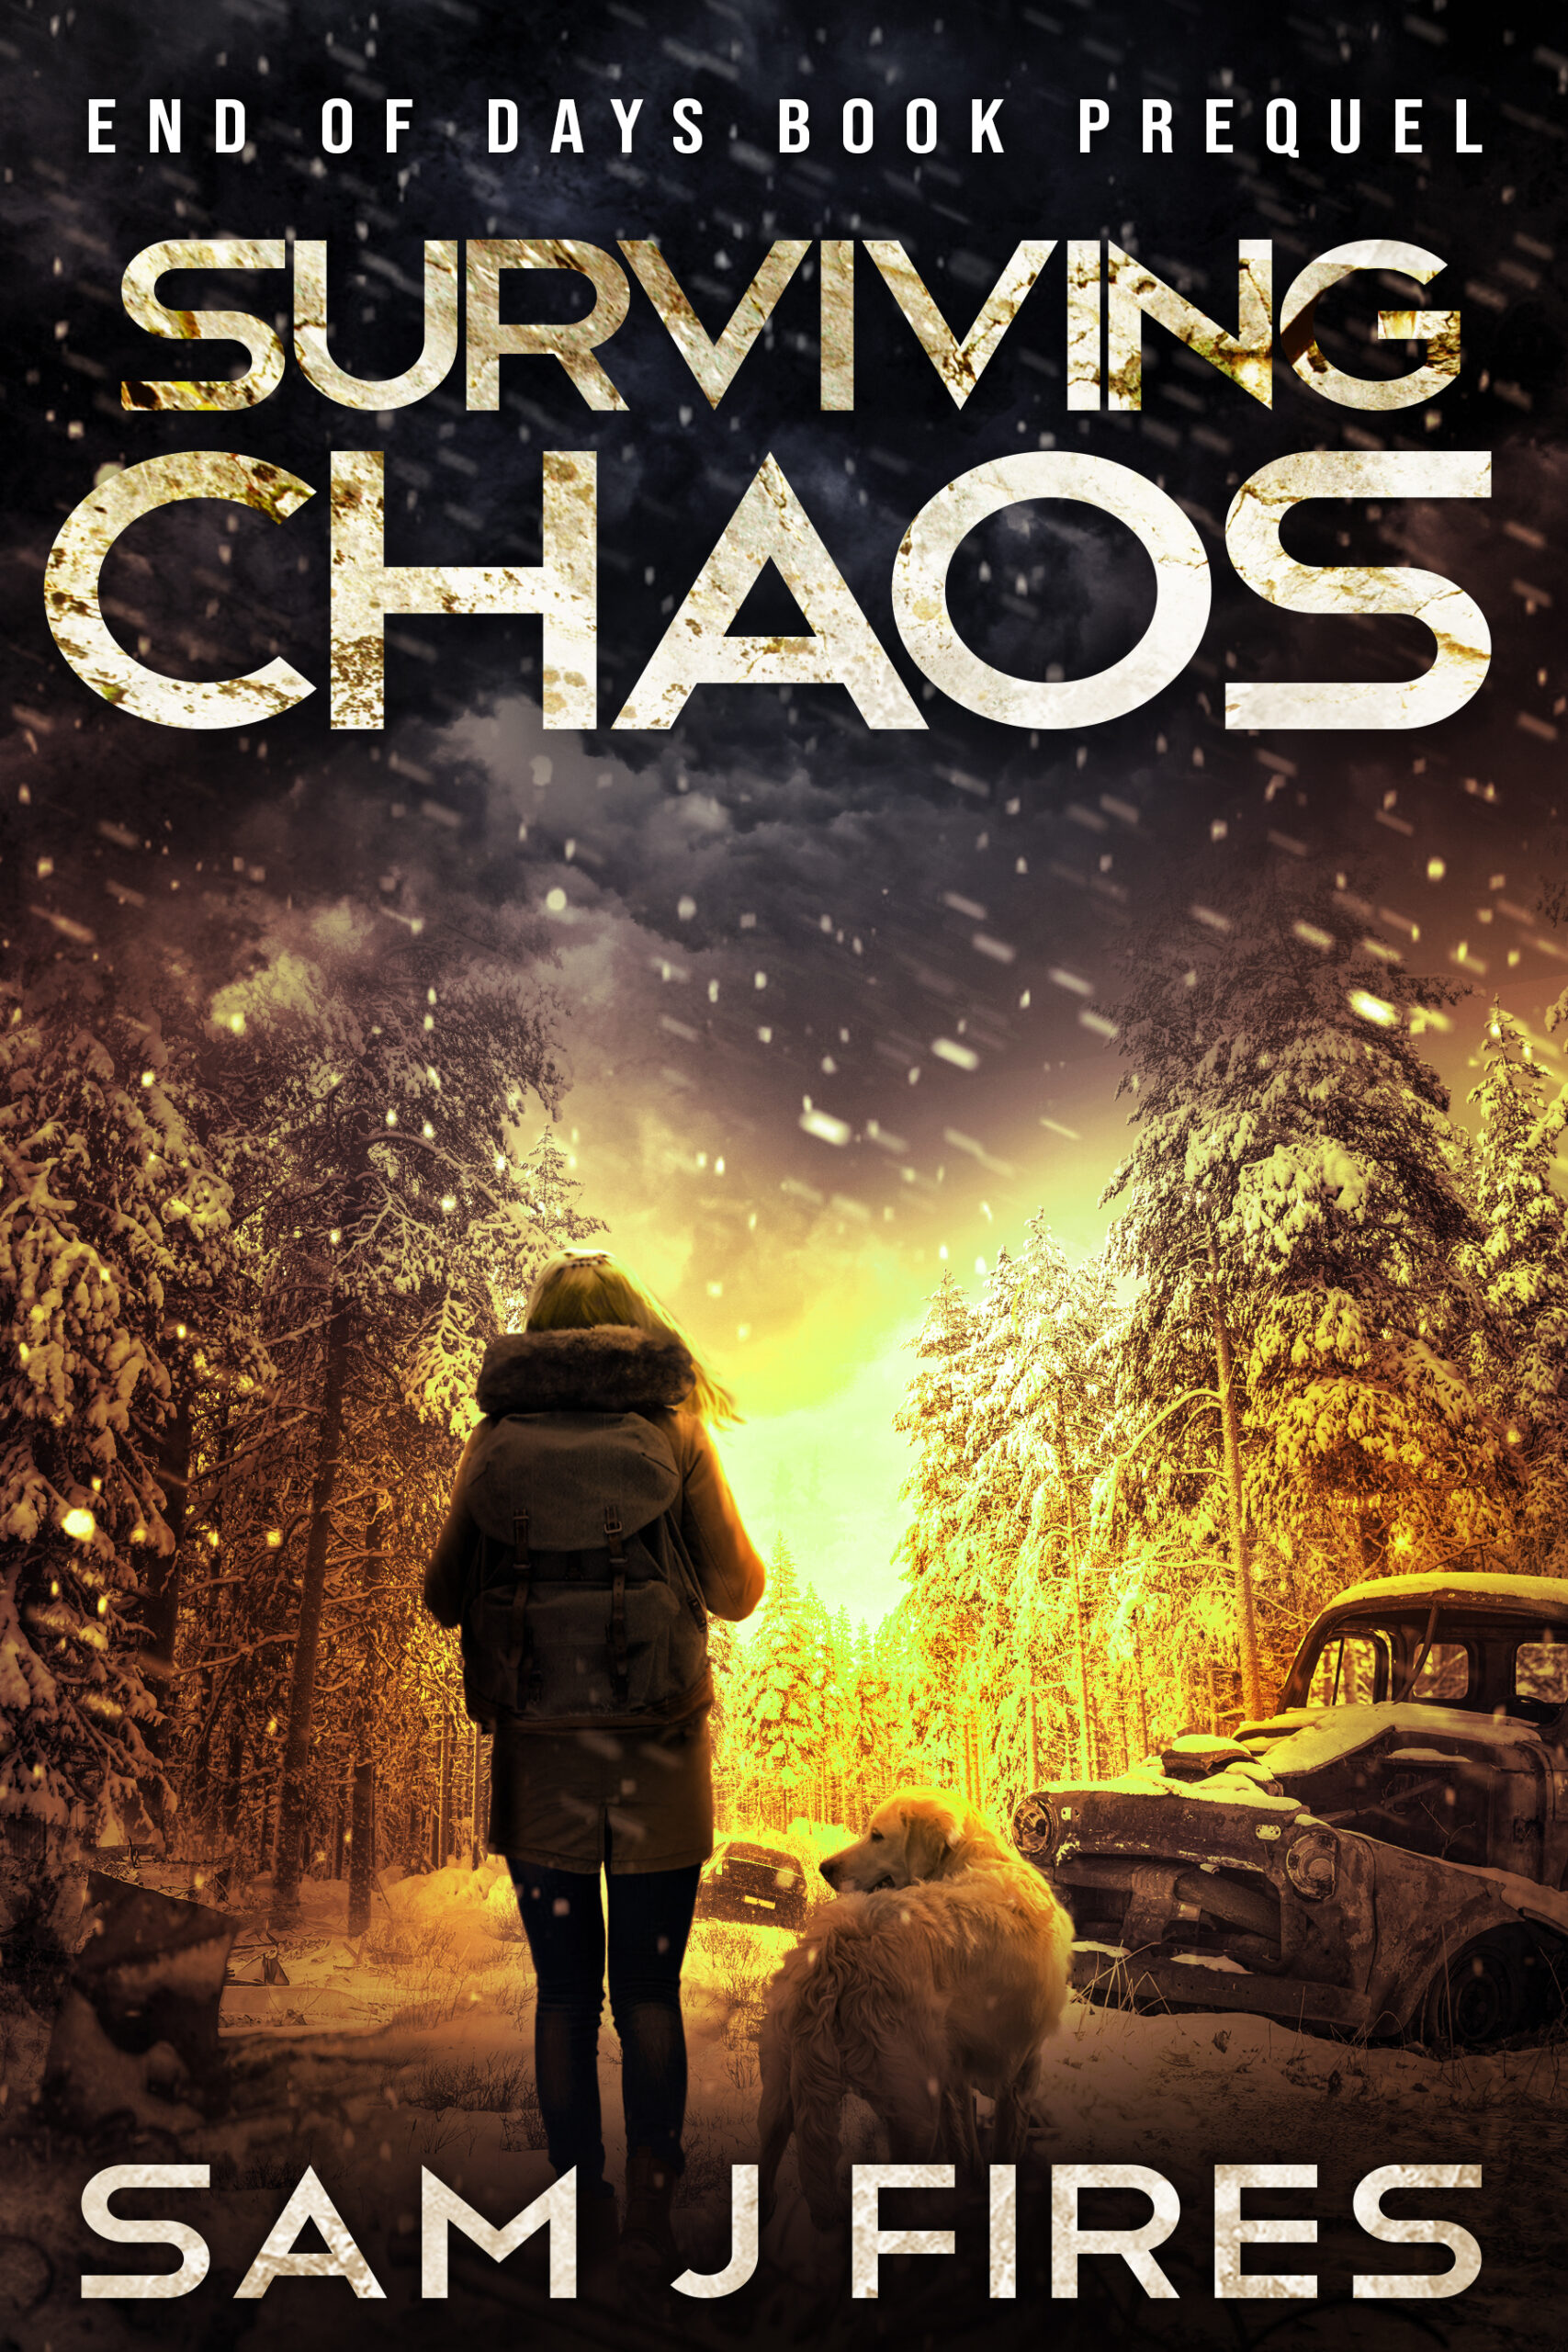 Cover art for the 'End of Days Prequel: Surviving Chaos' by Sam J Fires, showing a lone figure with a backpack and a large dog beside an abandoned vehicle in a snow-covered forest, indicating the beginning of a survival story